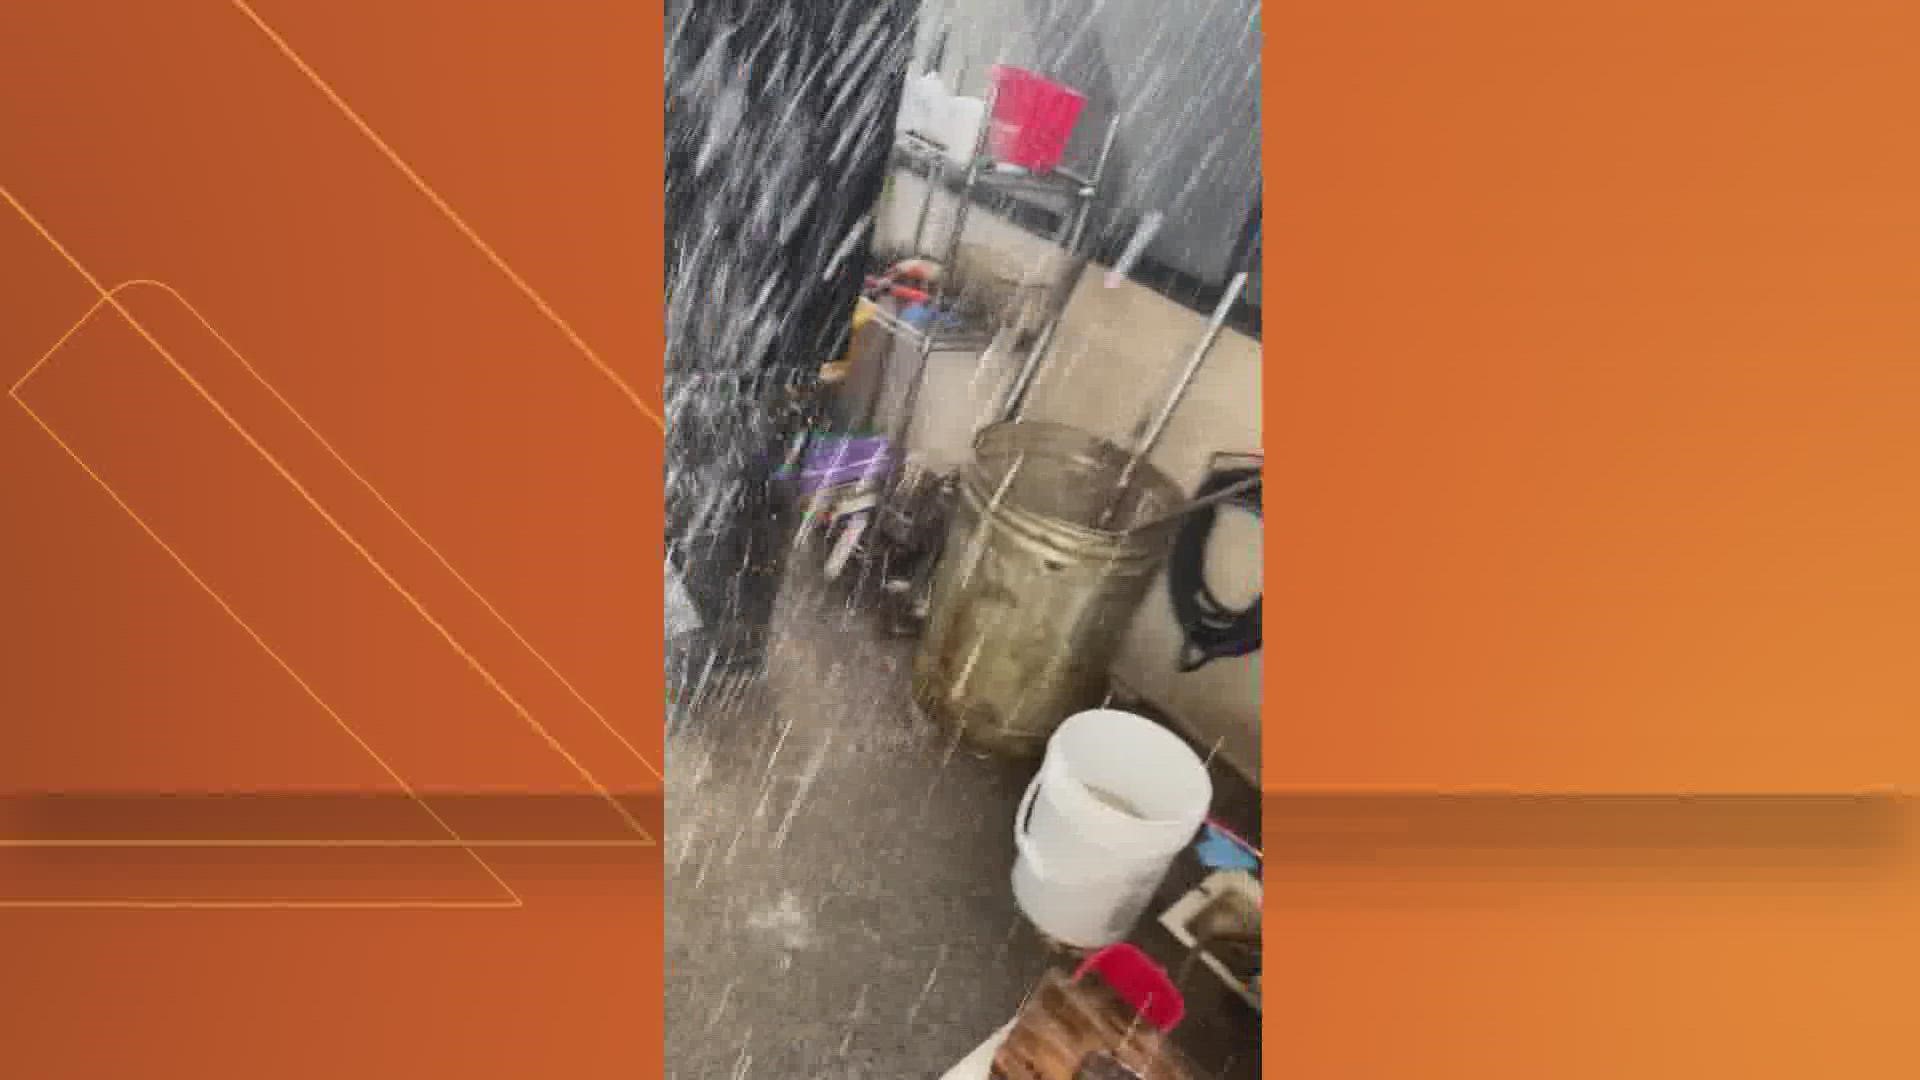 Thawing pipes burst after North Texas freeze. How can you prevent it? |  wfaa.com